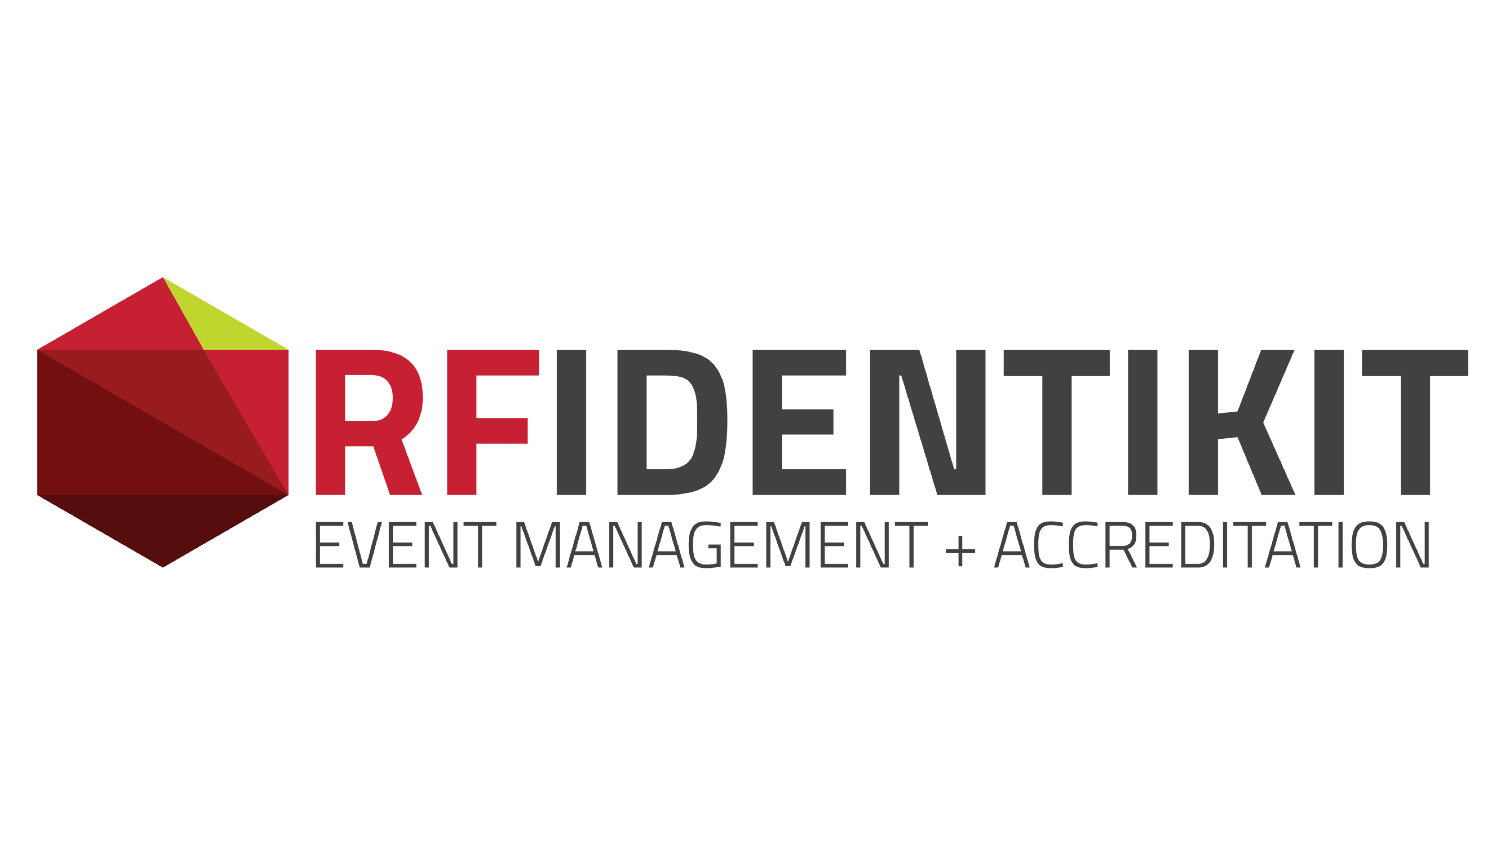 Accreditation, Access Control and Event Management